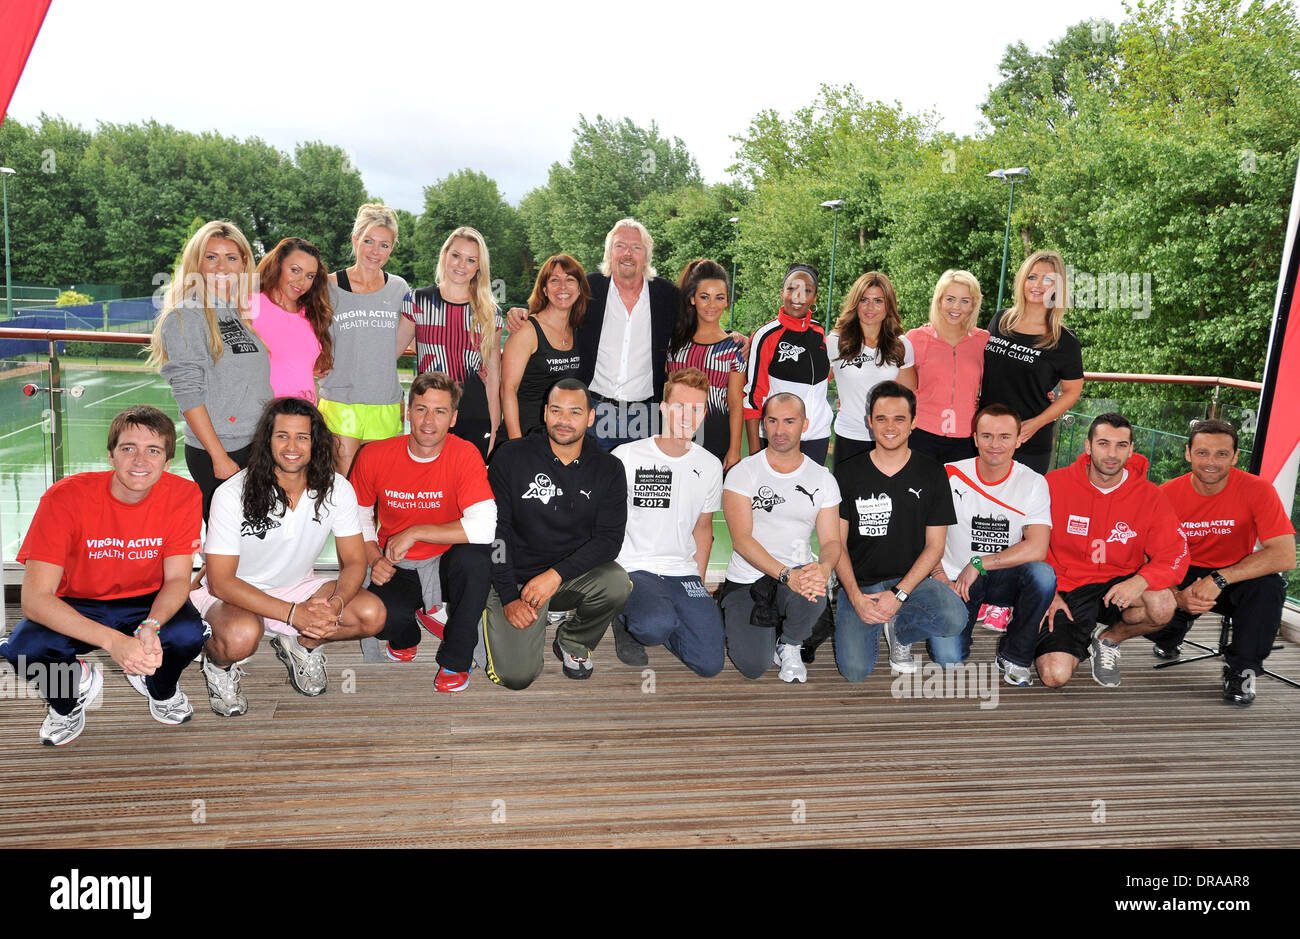 Sir Richard Branson, Louie Spence,  Chelsee Healey,  Zoe Hardman, Michael Underwood and Angellica Bell, Ollie Locke, Nicola Mclean, Michelle Heaton and Ricky Rayment, Kay Burley, Toby Anstis, James Barr, Charlie Brooks, Oliver Phelps, Jon Lee, Nell McAndrew Sir Richard Branson unveils the first group of celebrities taking part in September's 2012 Virgin Active London Triathlon Lond Stock Photo